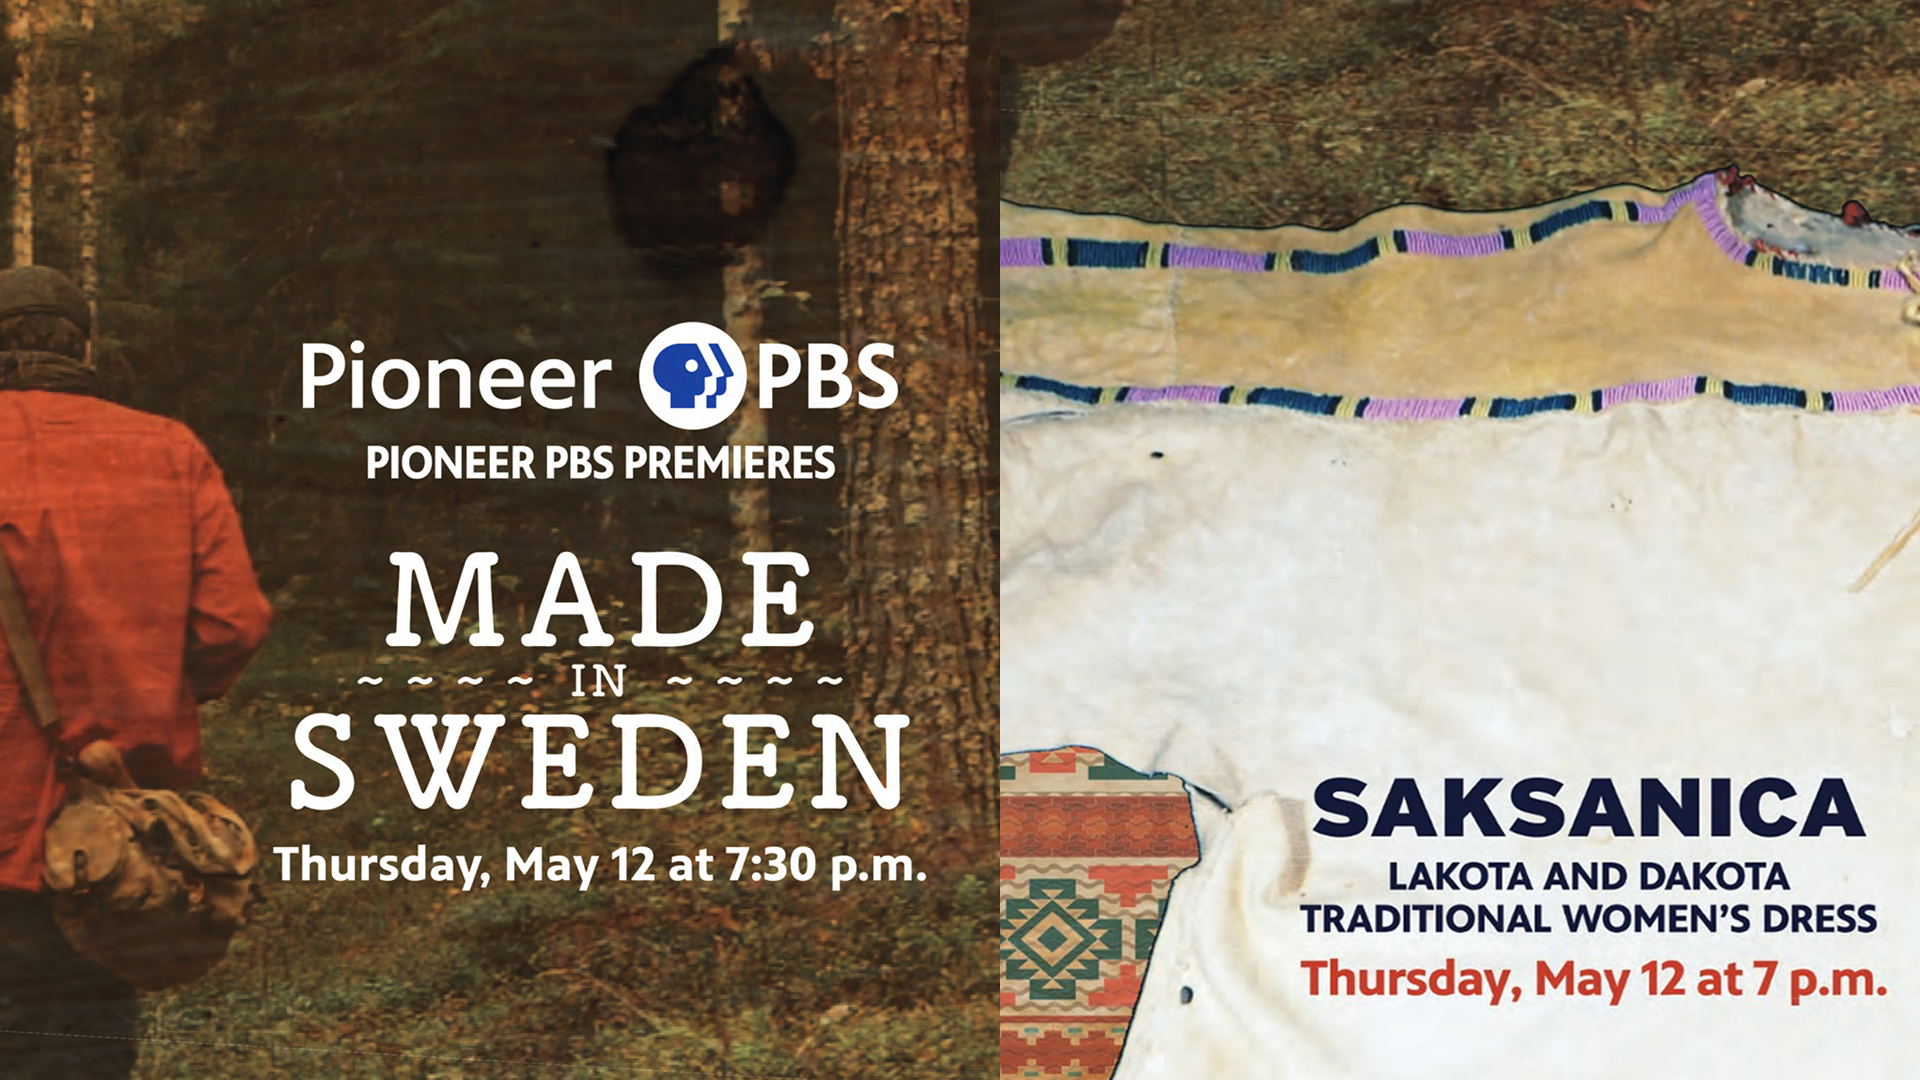 Two new Pioneer PBS documentaries to be broadcast on Thursday, May 12: Saksanica and Made in Sweden